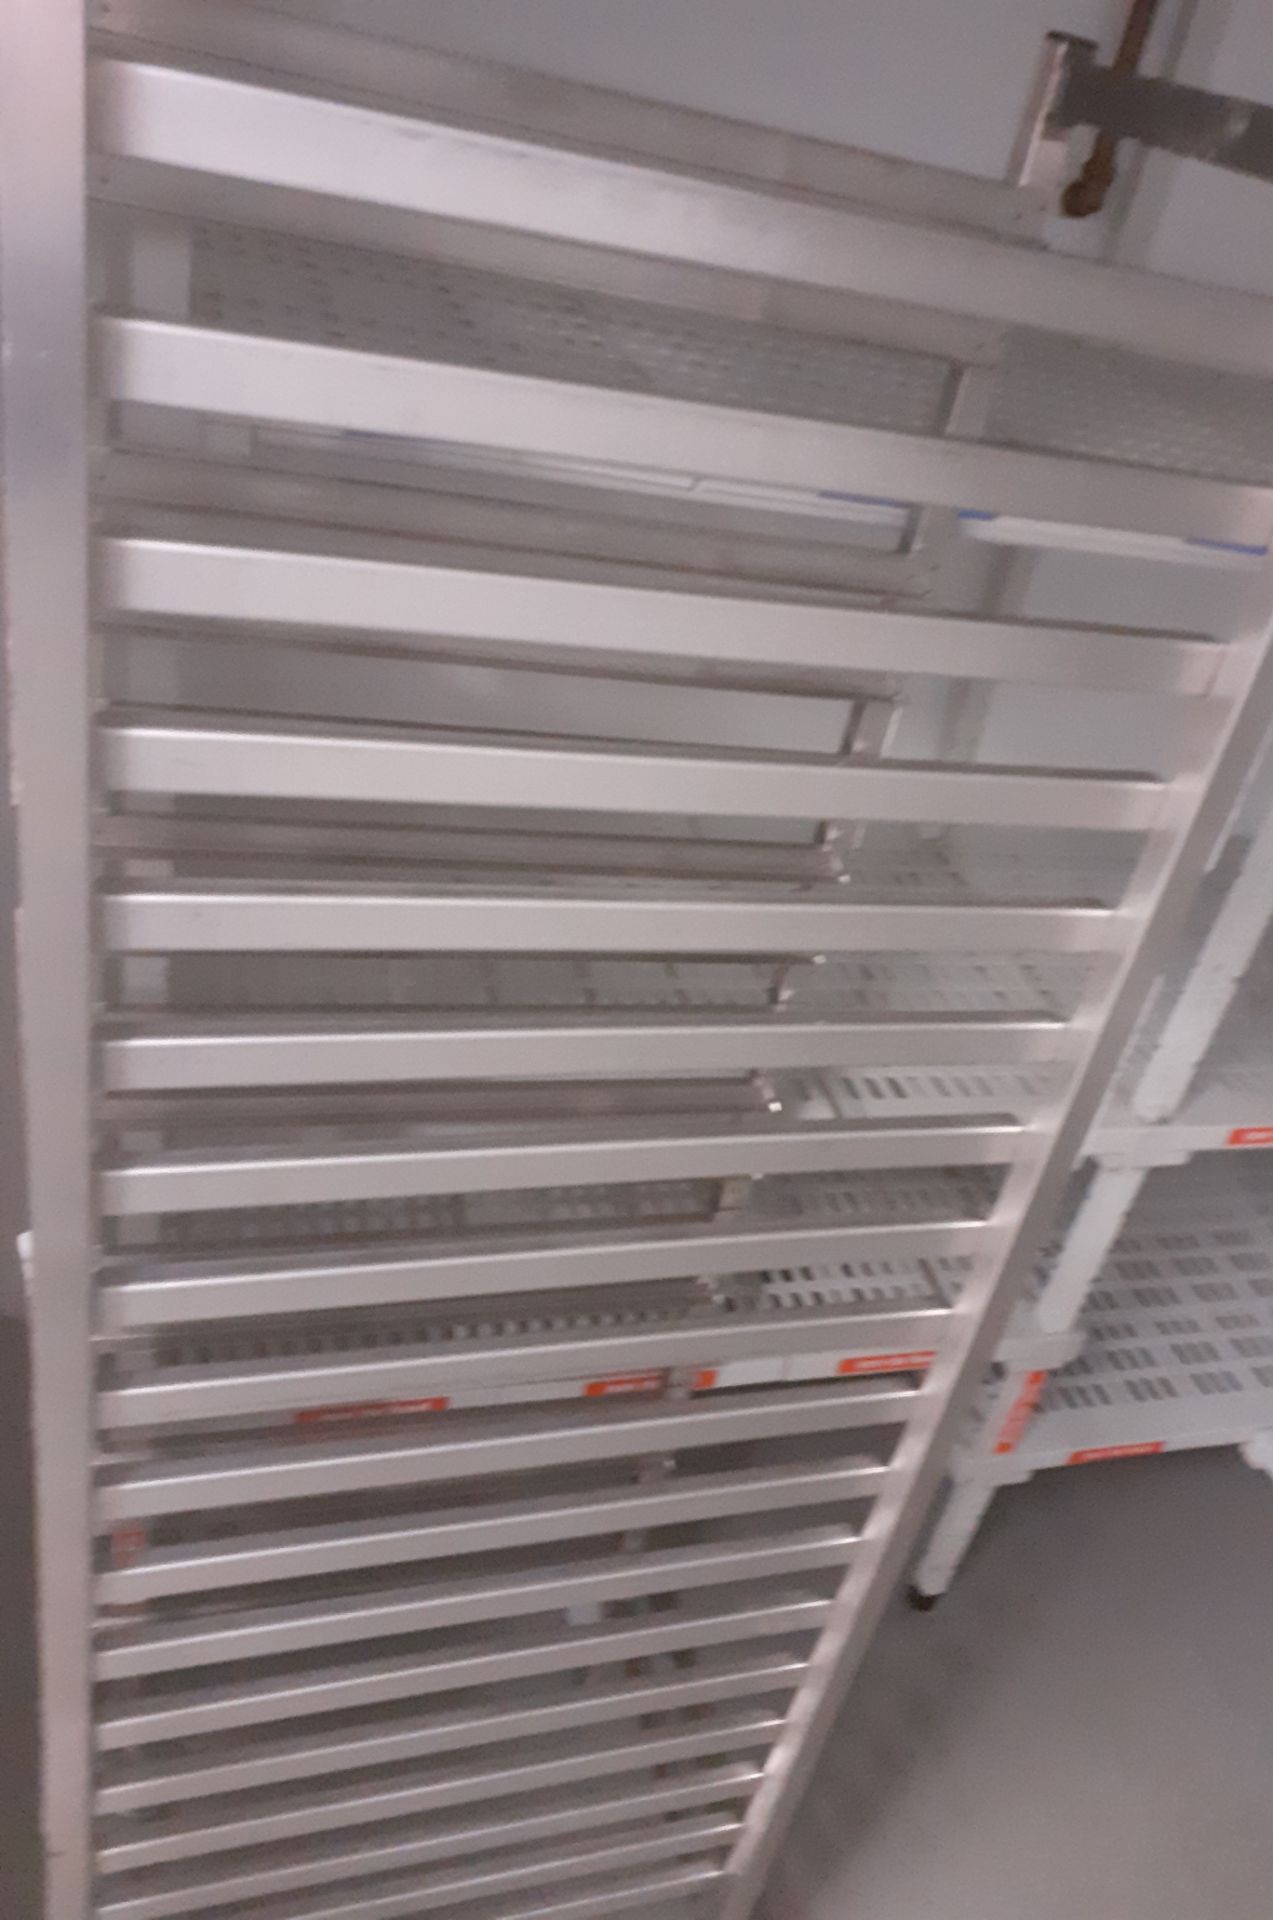 1 x Stainless Steel 20 Tier Commercial Kitchen Food Tray Rack - CL582 - Location: London EC4V - Image 2 of 4